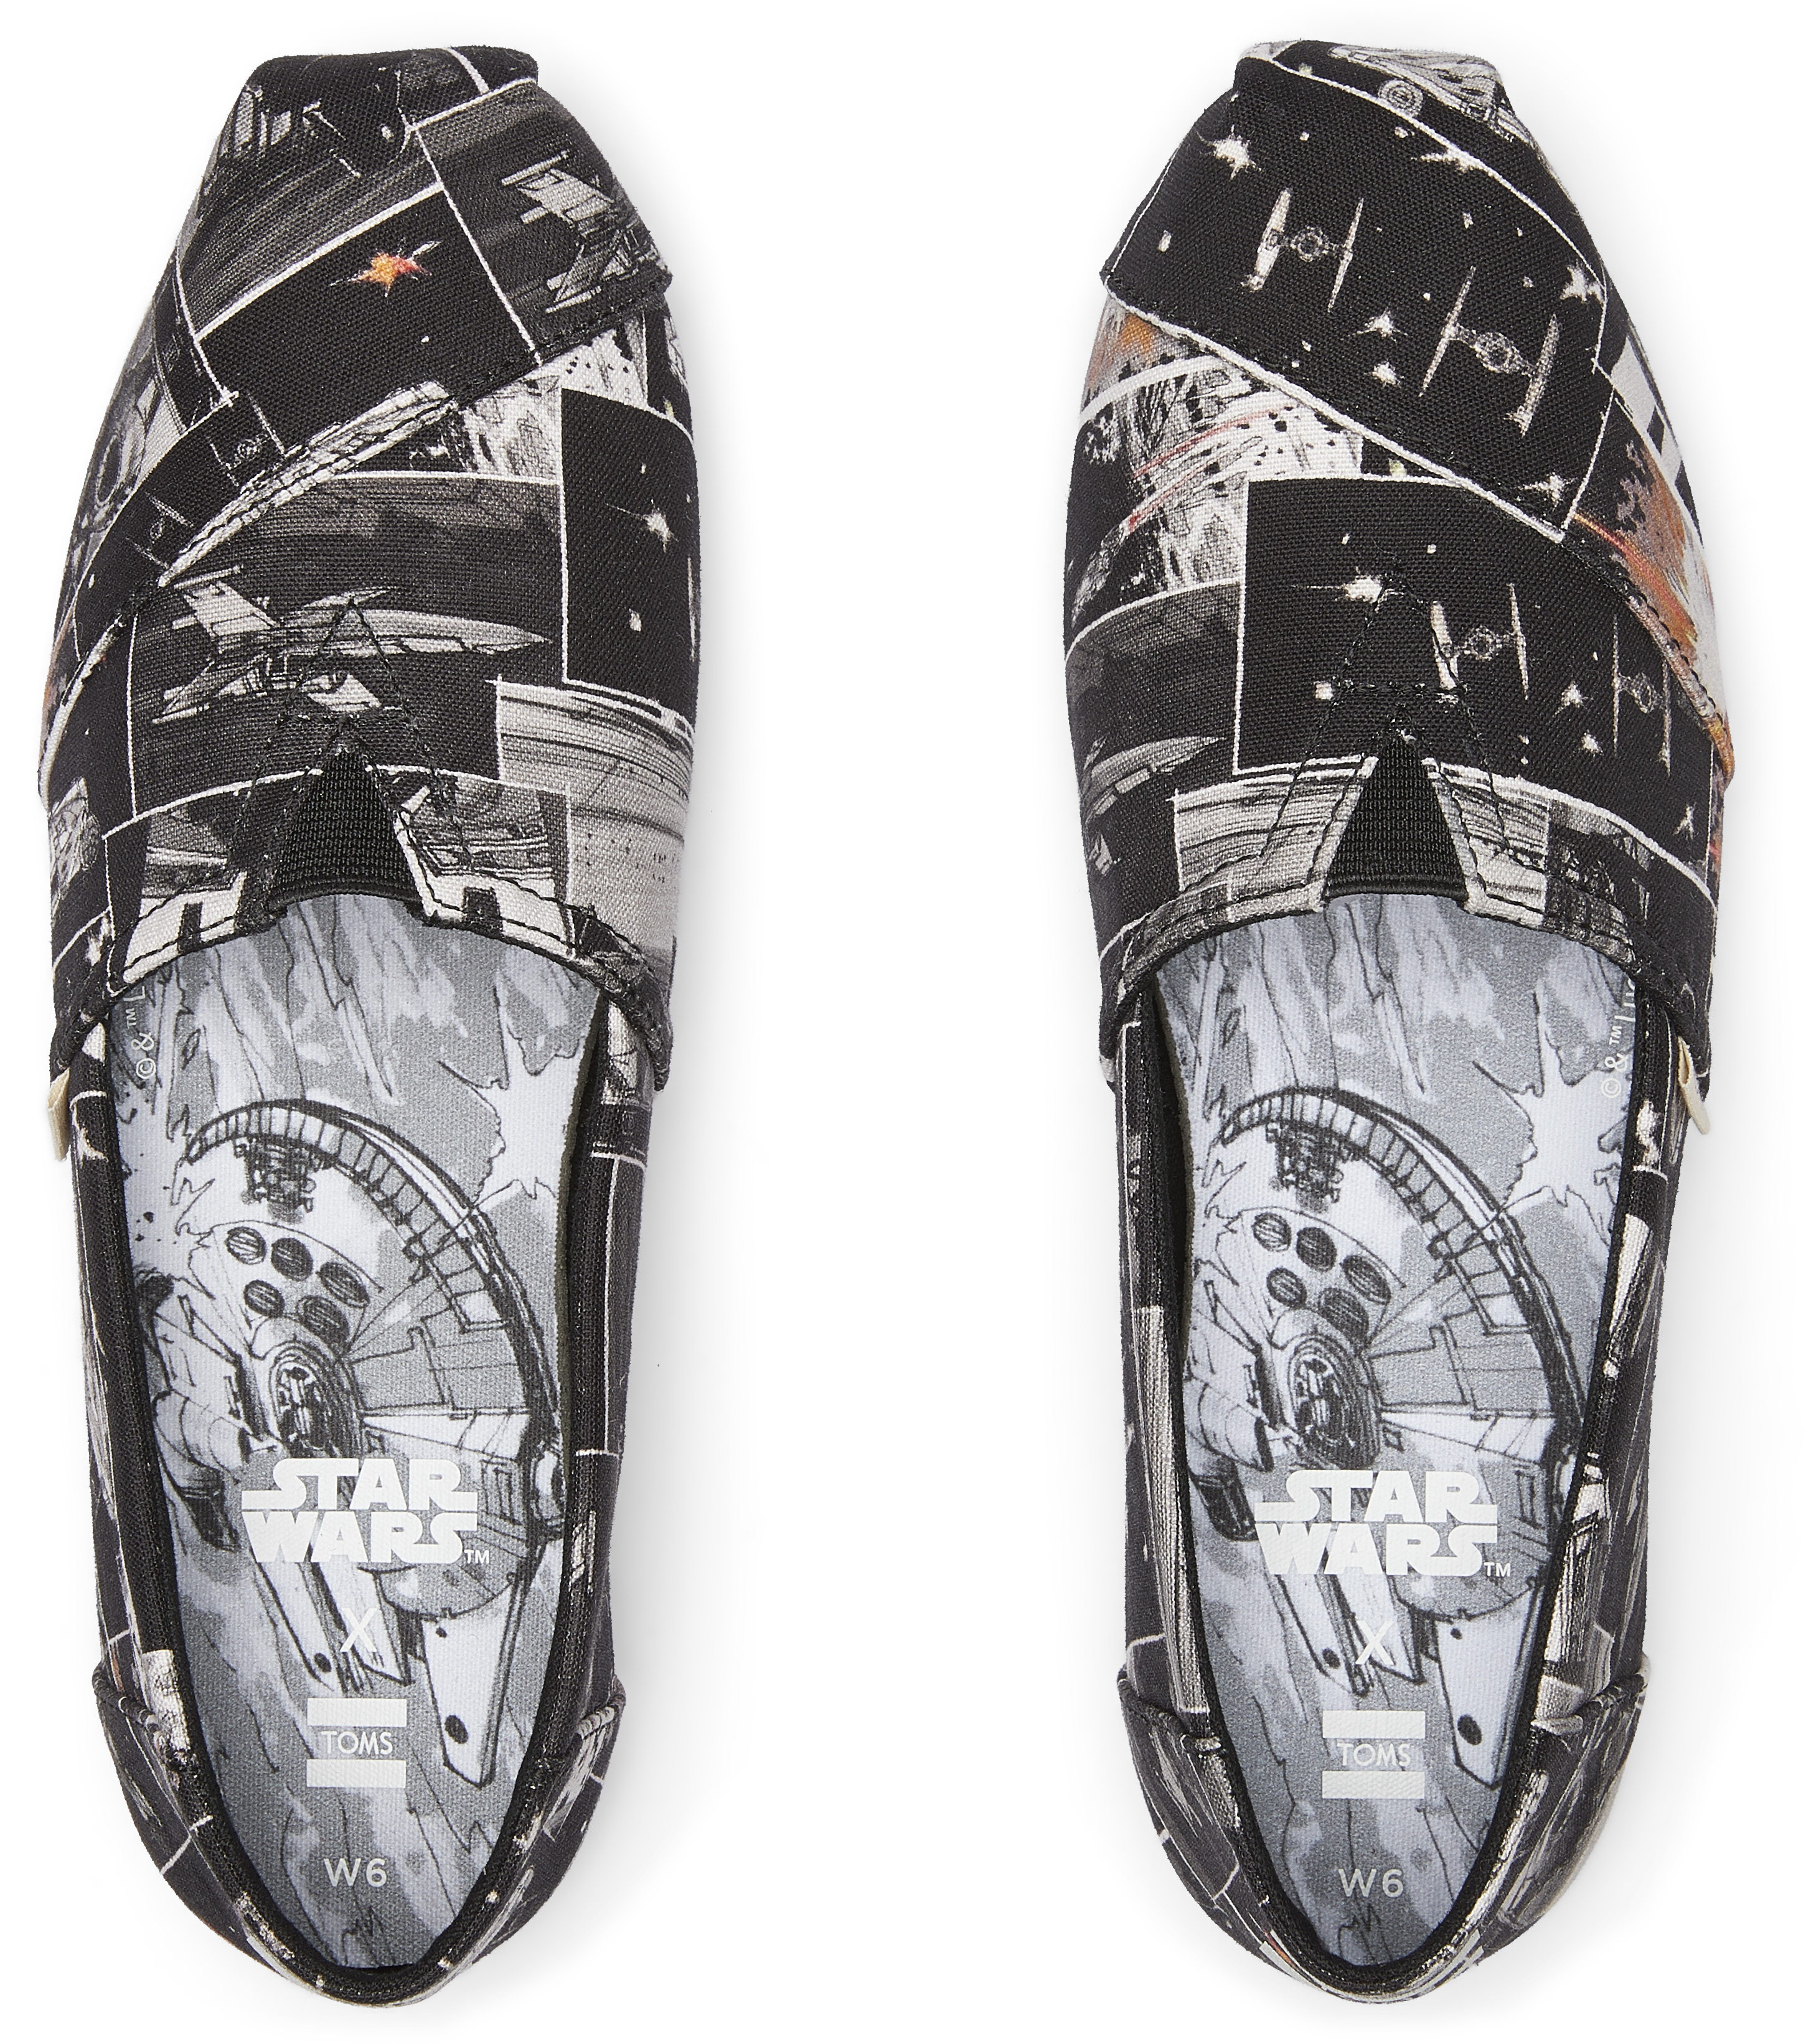 One of the new pairs of Star Wars inspired shoes by TOMS.